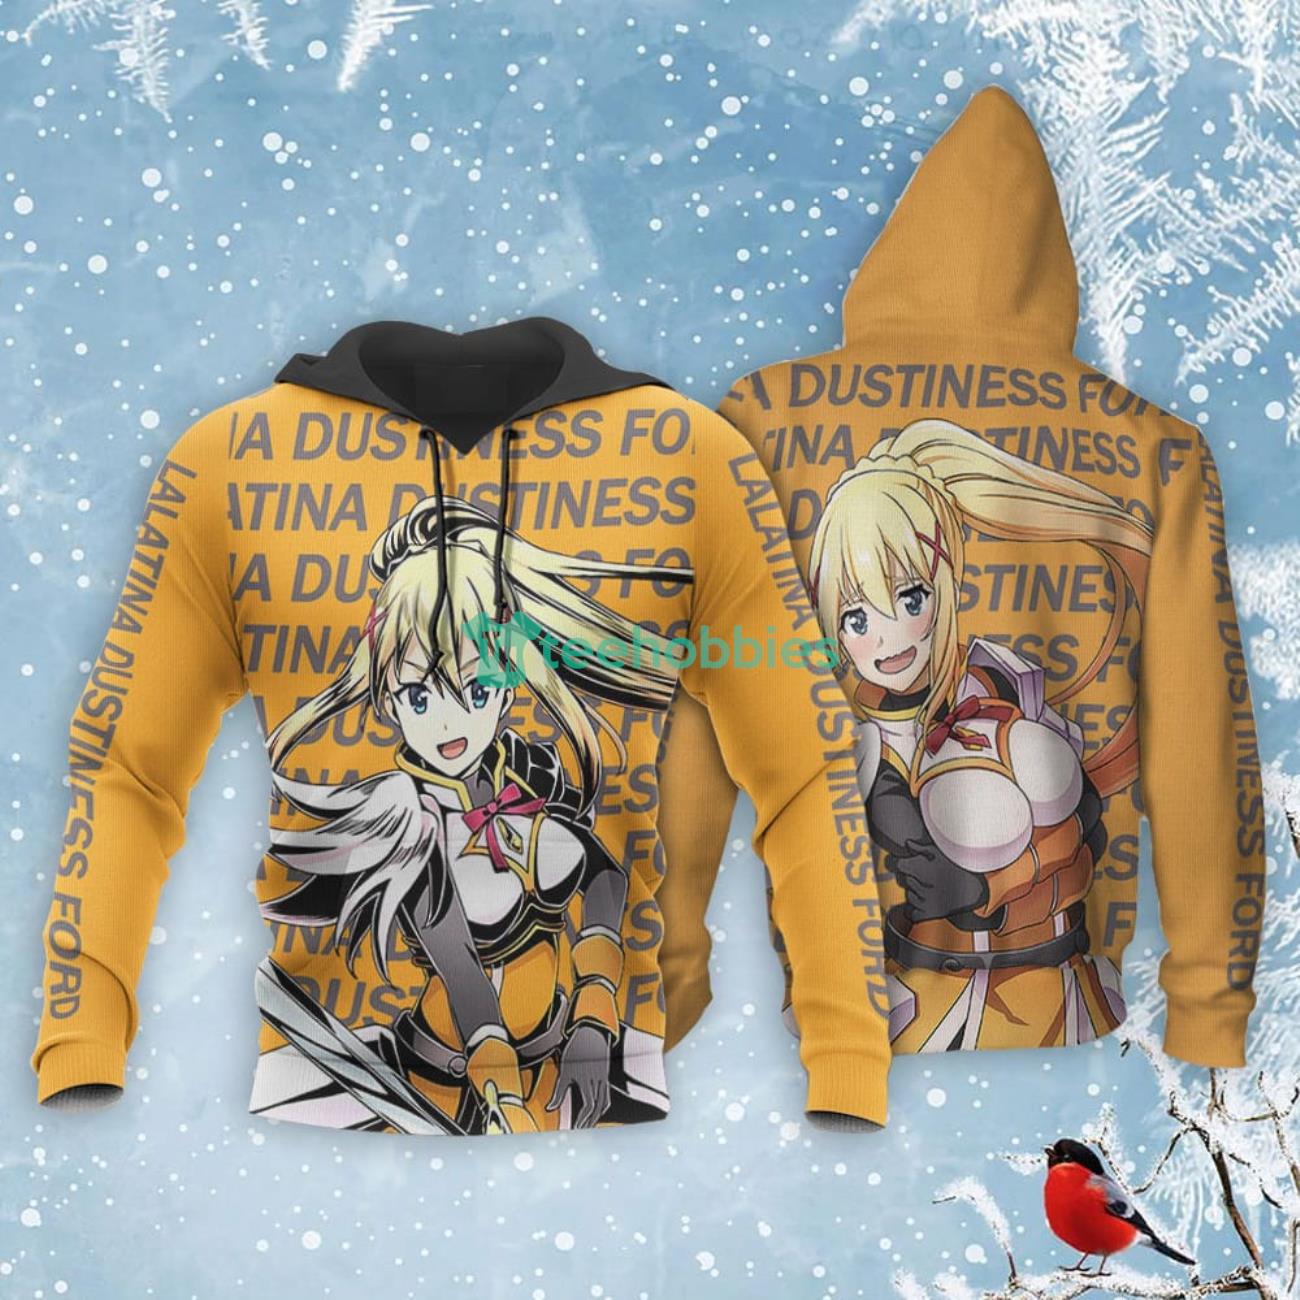 Lalatina Dustiness Ford All Over Printed 3D Shirt KonoSuba Custom Anime Fans For Fans Product Photo 3 Product photo 2